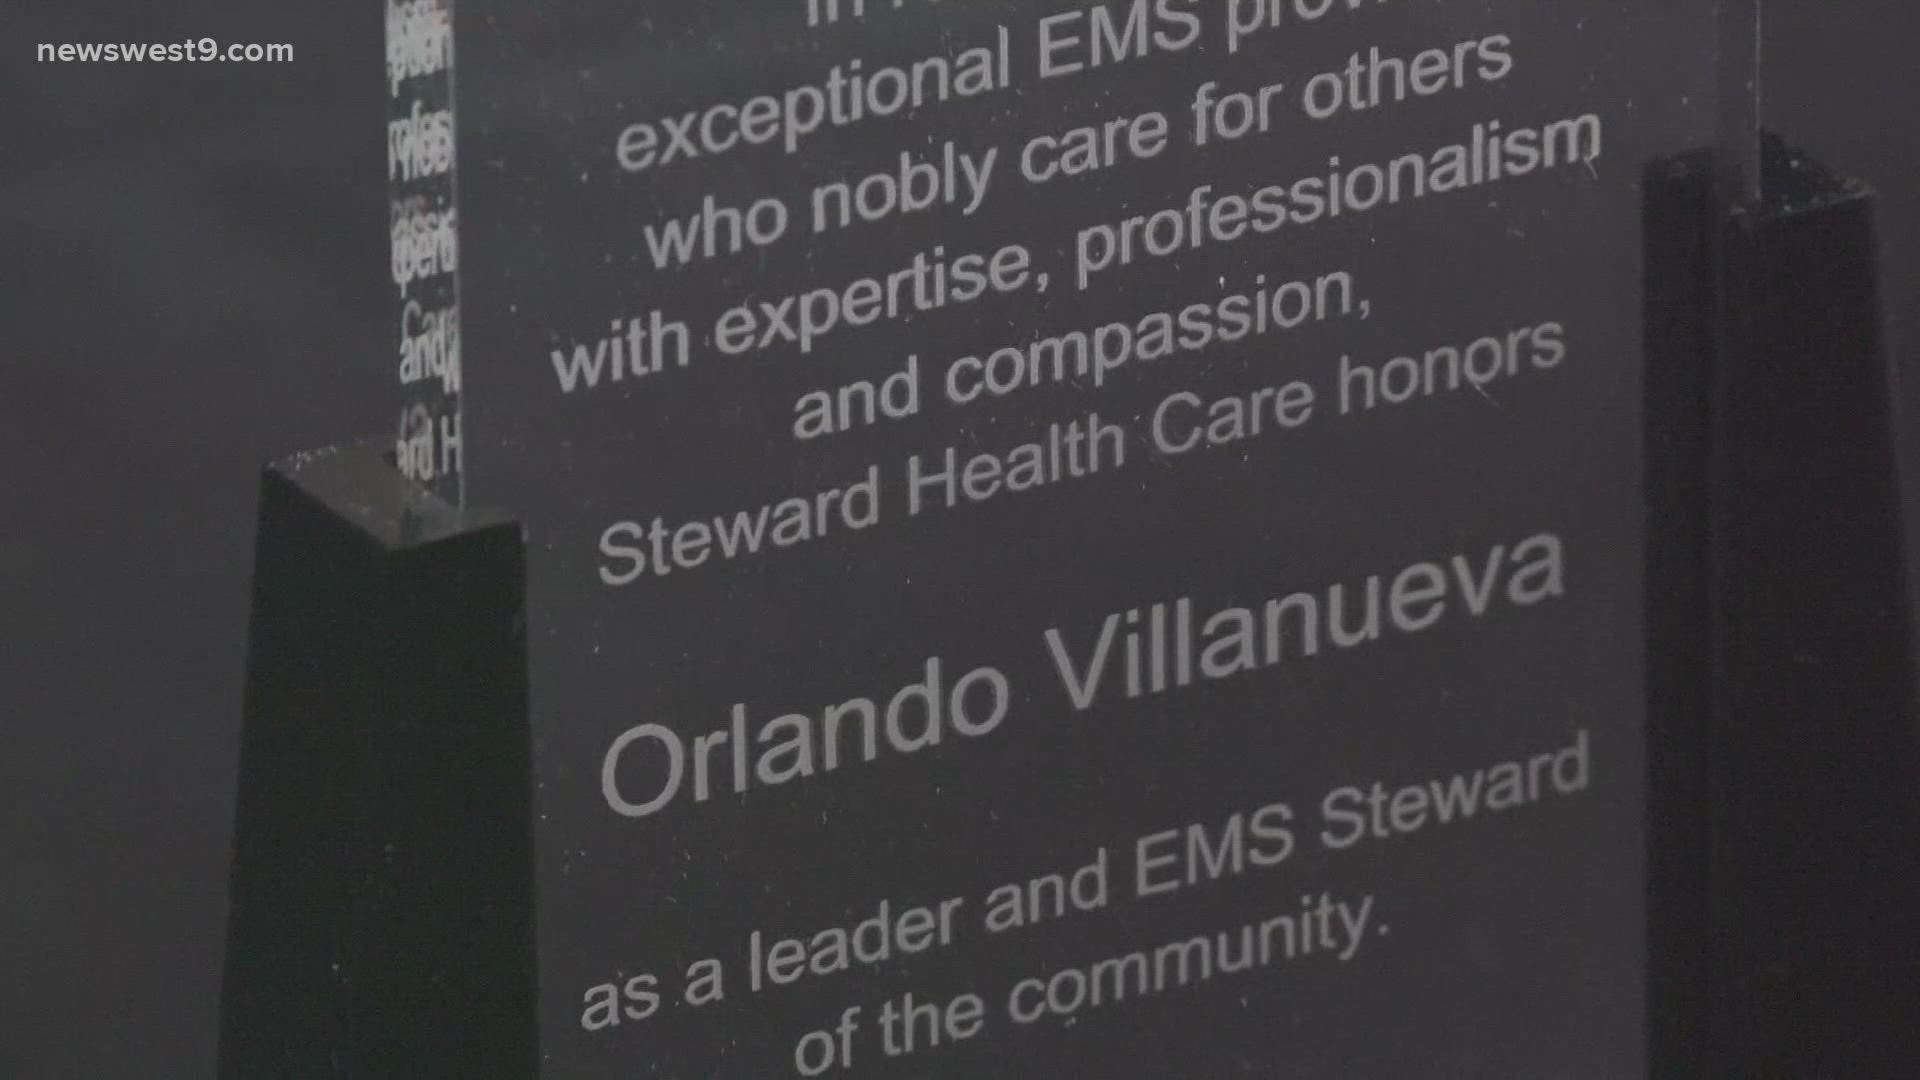 Captain Orlando Villanueva has been with OFR for more than 20 years.